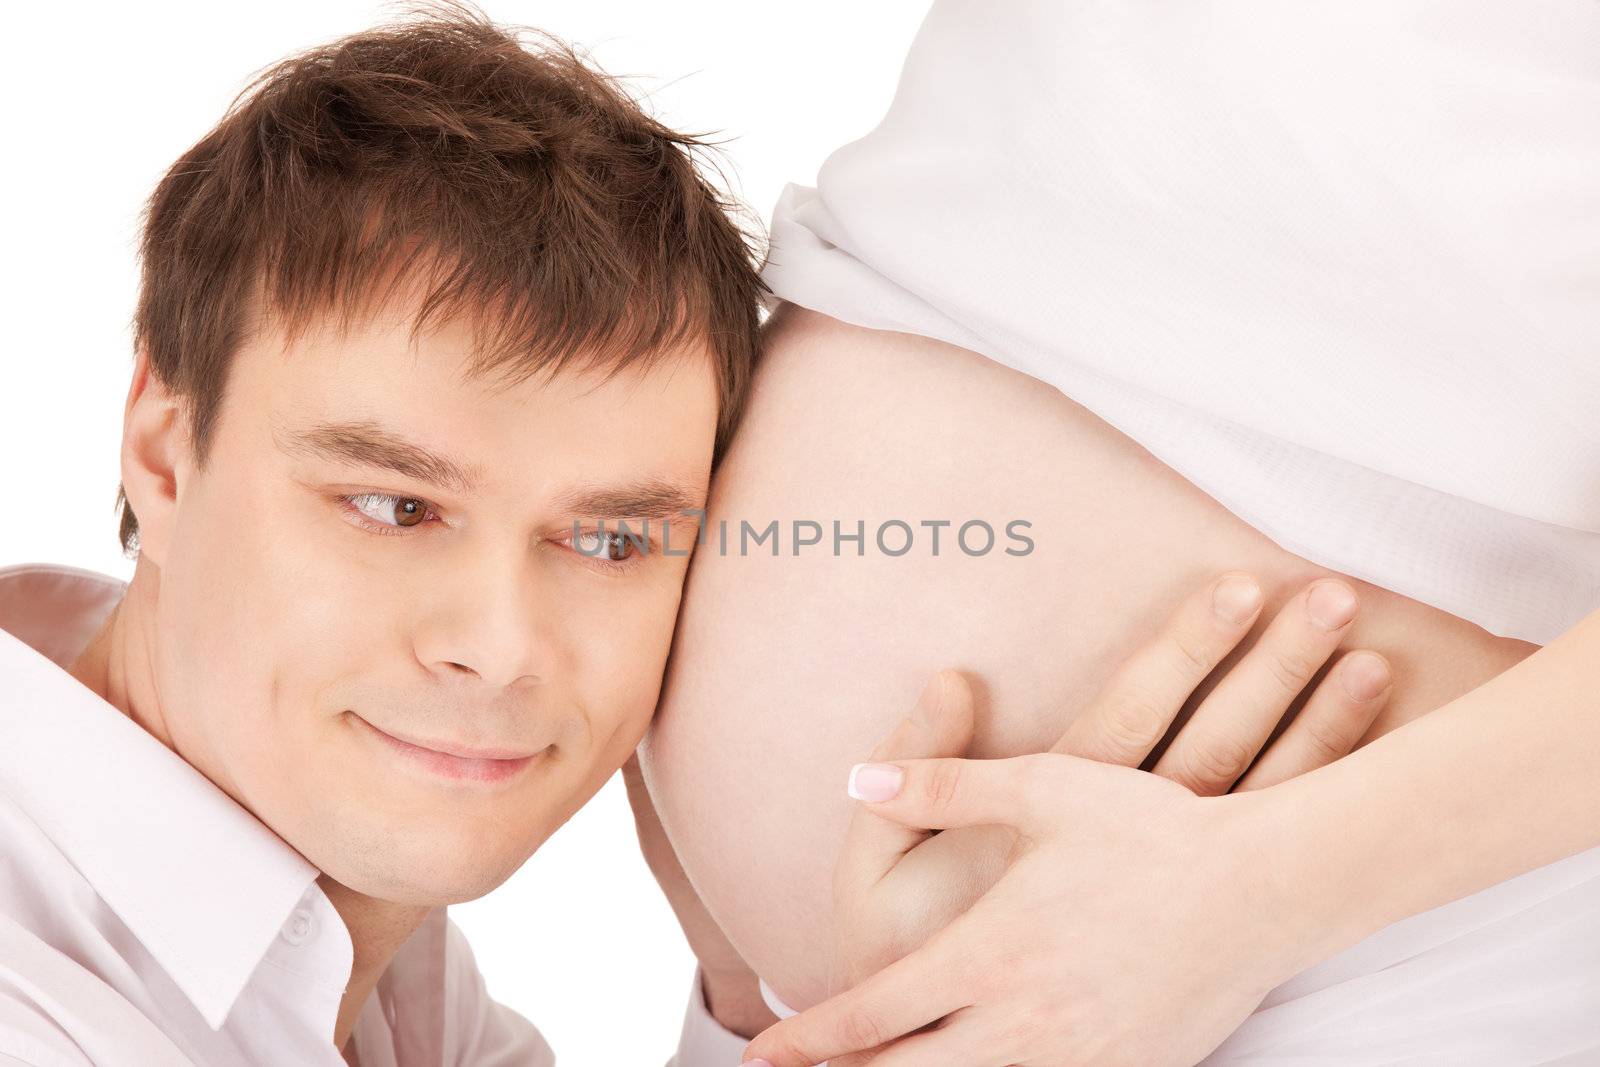 bright closeup picture of male face and pregnant woman belly